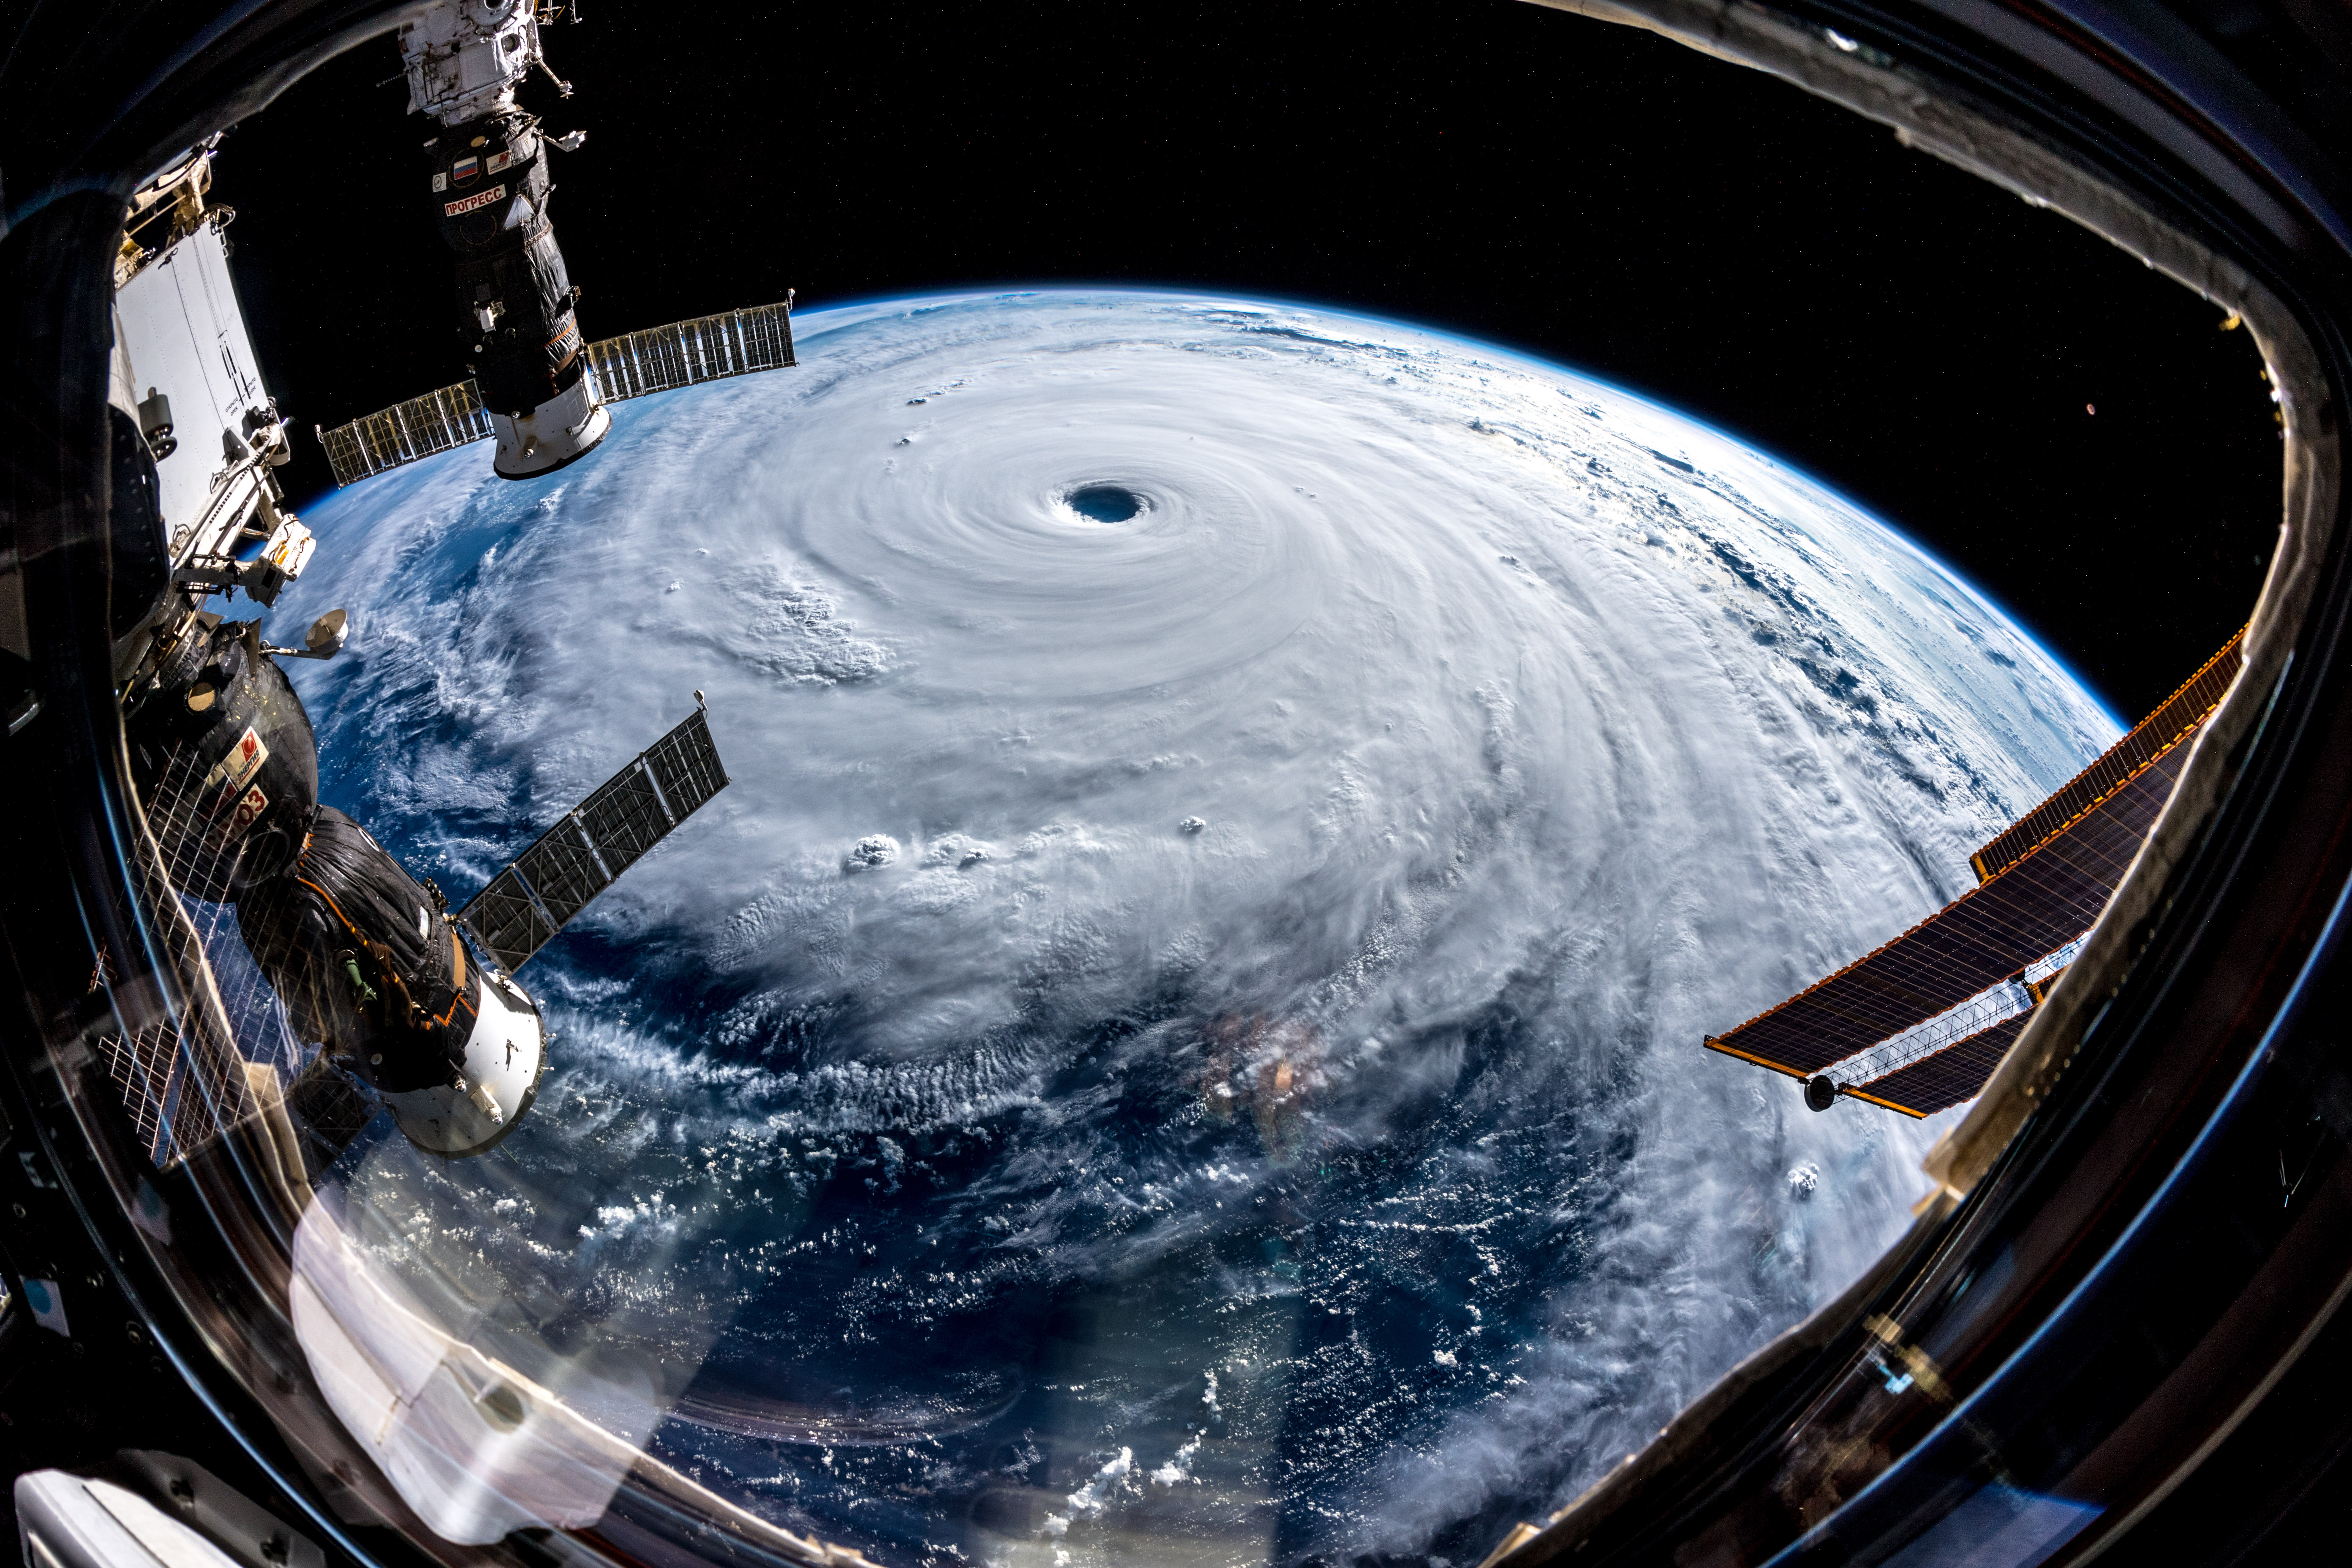 General 5568x3712 Alexander Gerst hurricane Typhoon cyclone spiral NASA International Space Station Earth space nature science space station clouds planet satellite sunlight atmosphere photography storm landscape